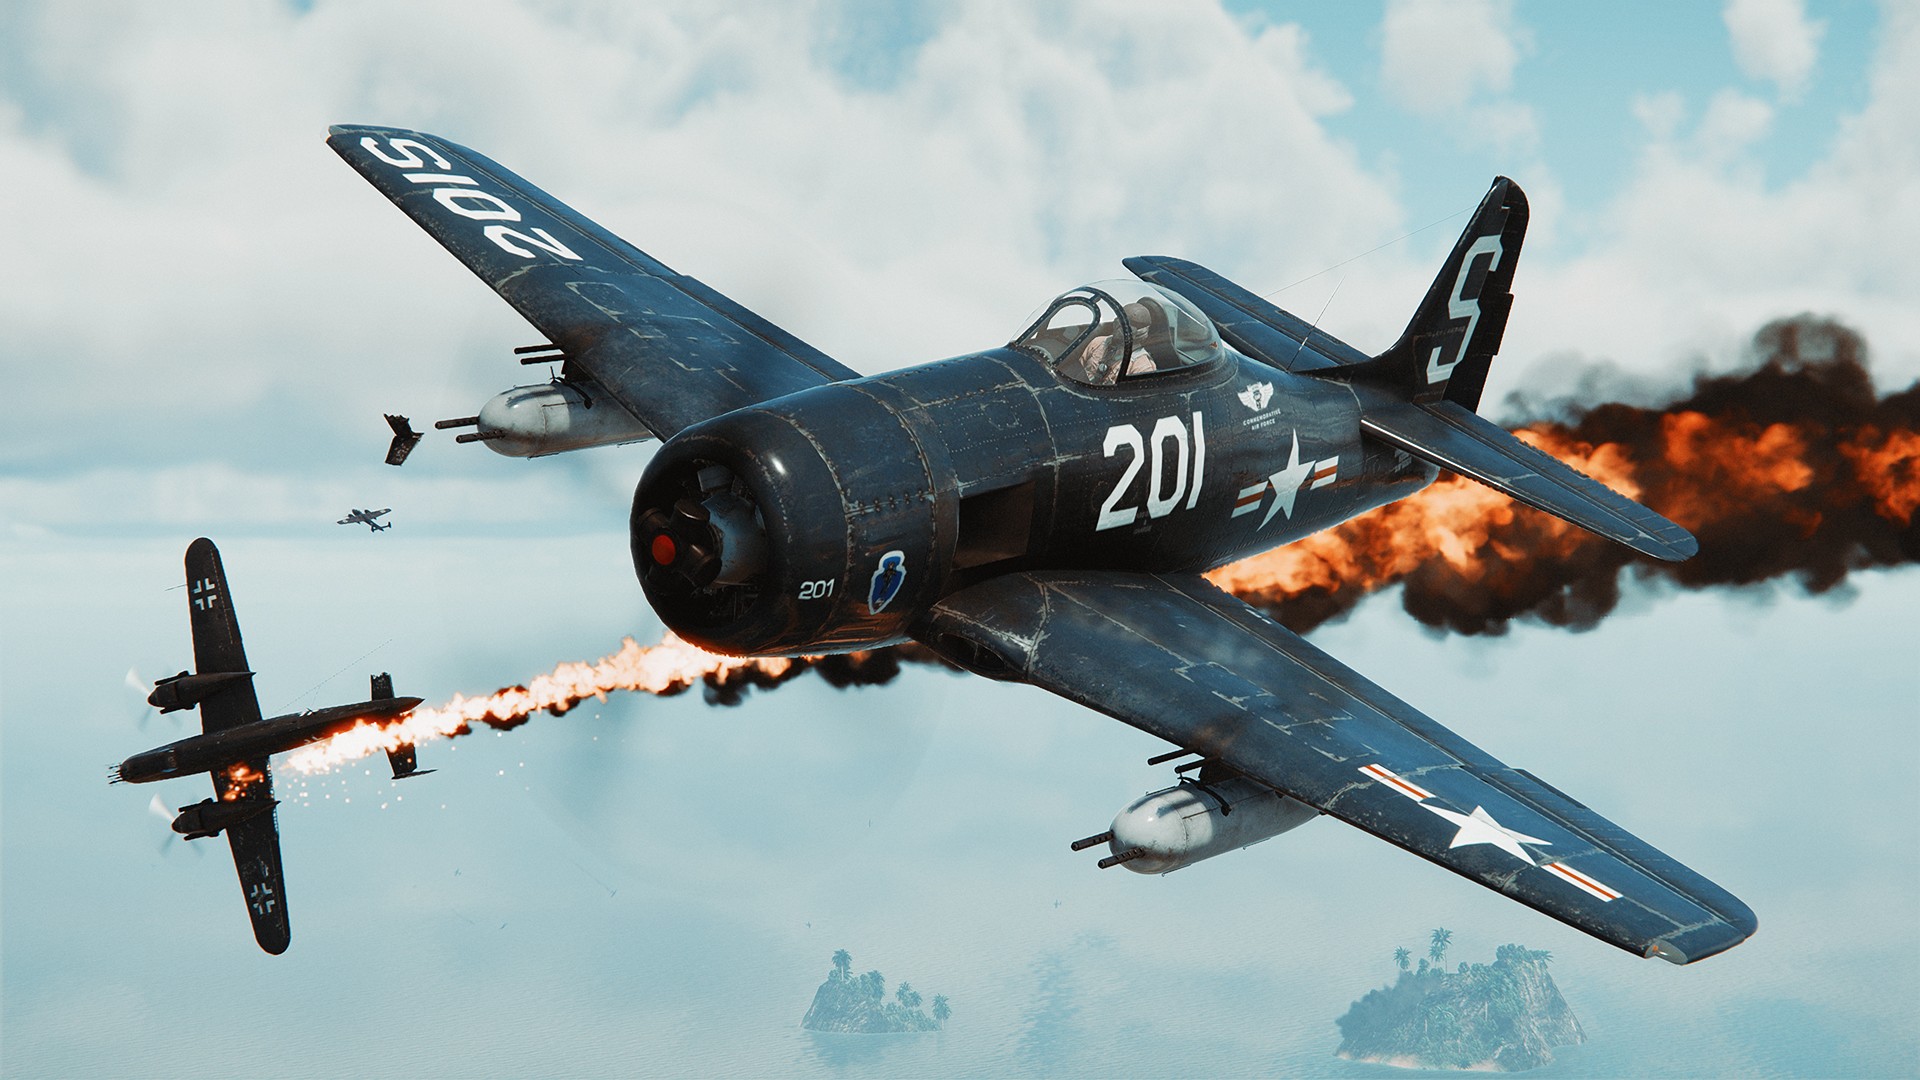 Getting into War Thunder for the first time